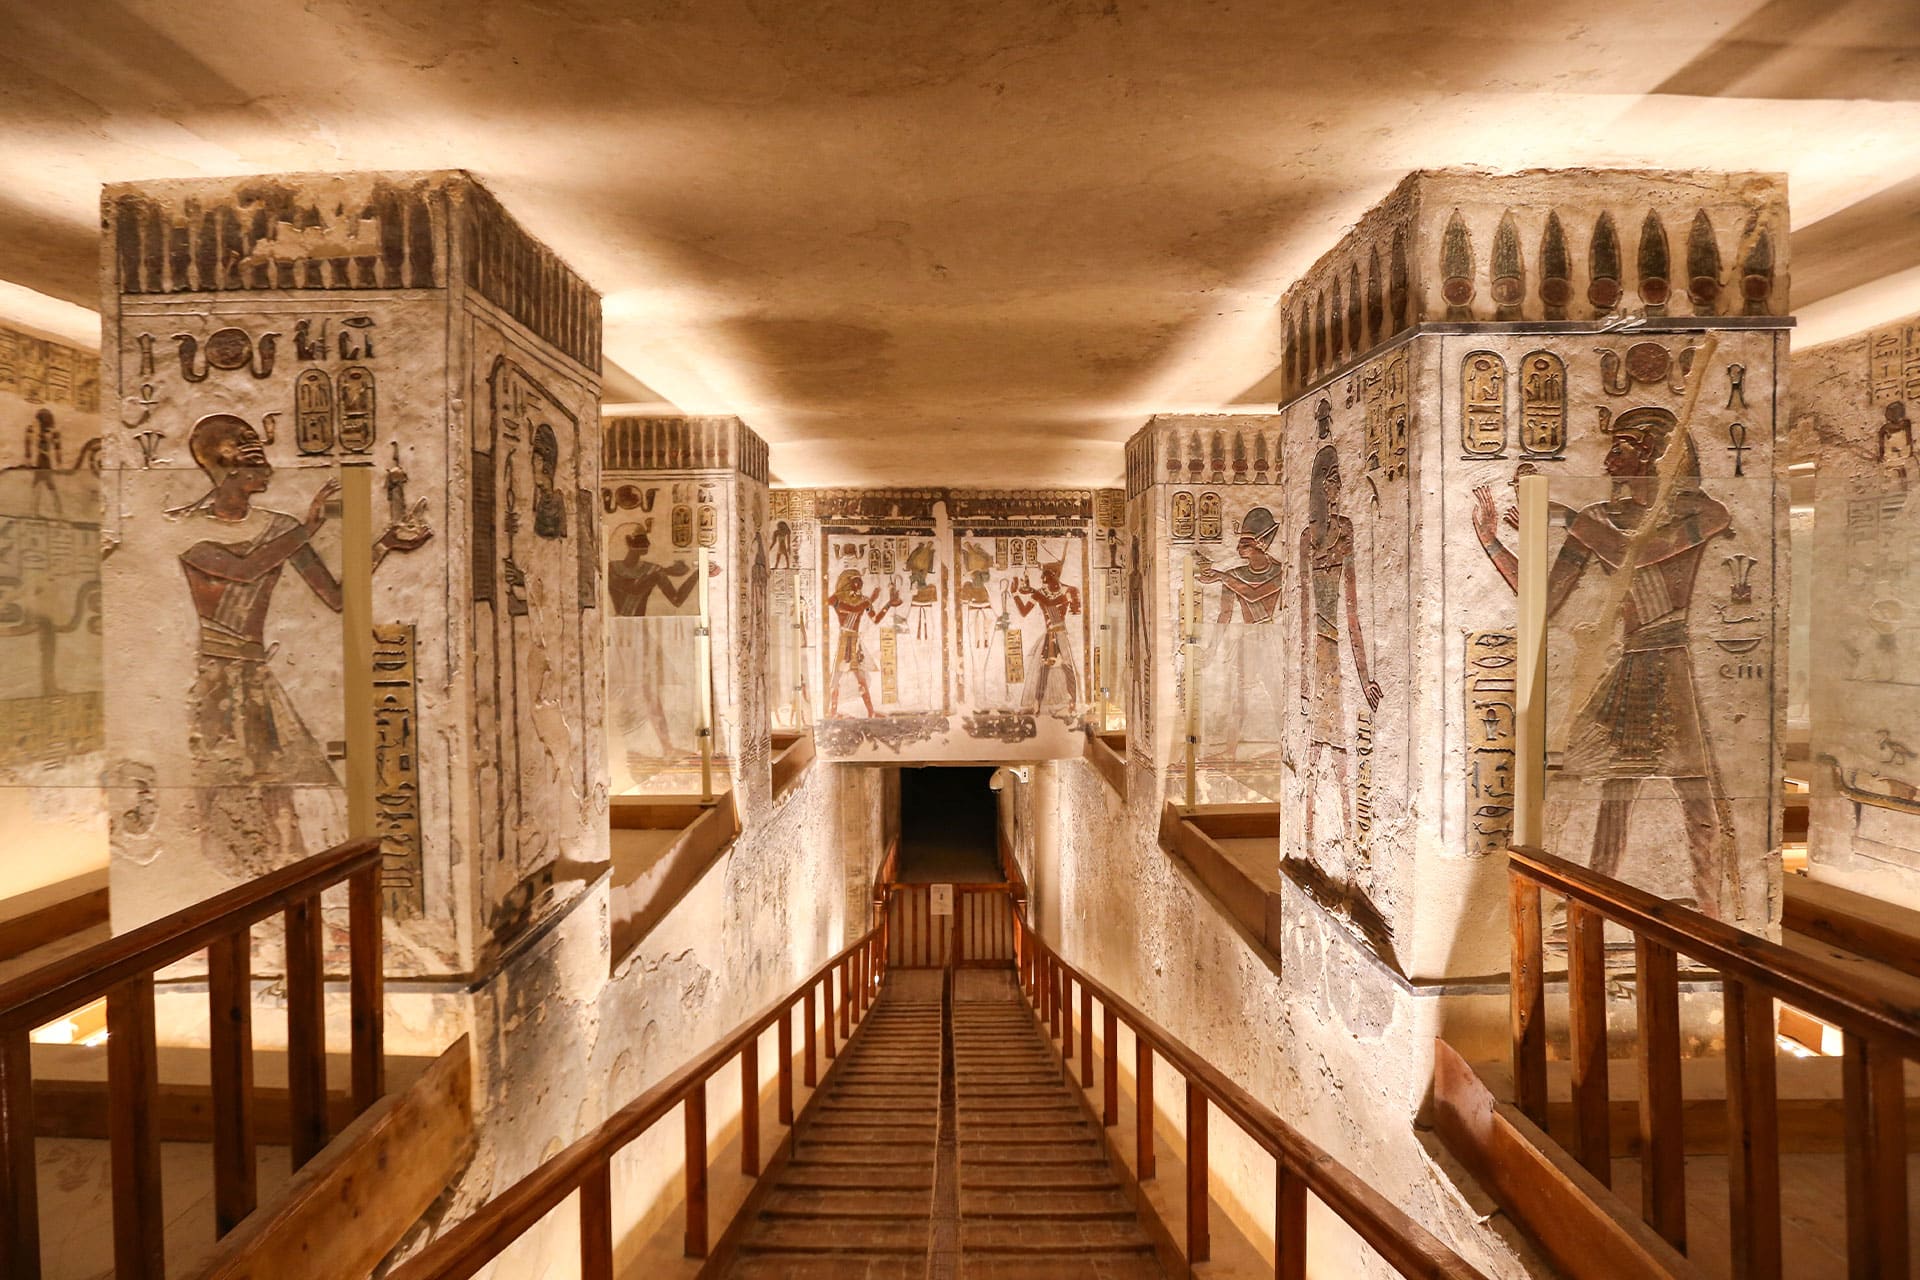 The inside of a tomb within the famed Valley of the Kings in Luxor – one of the top attractions in Egypt.